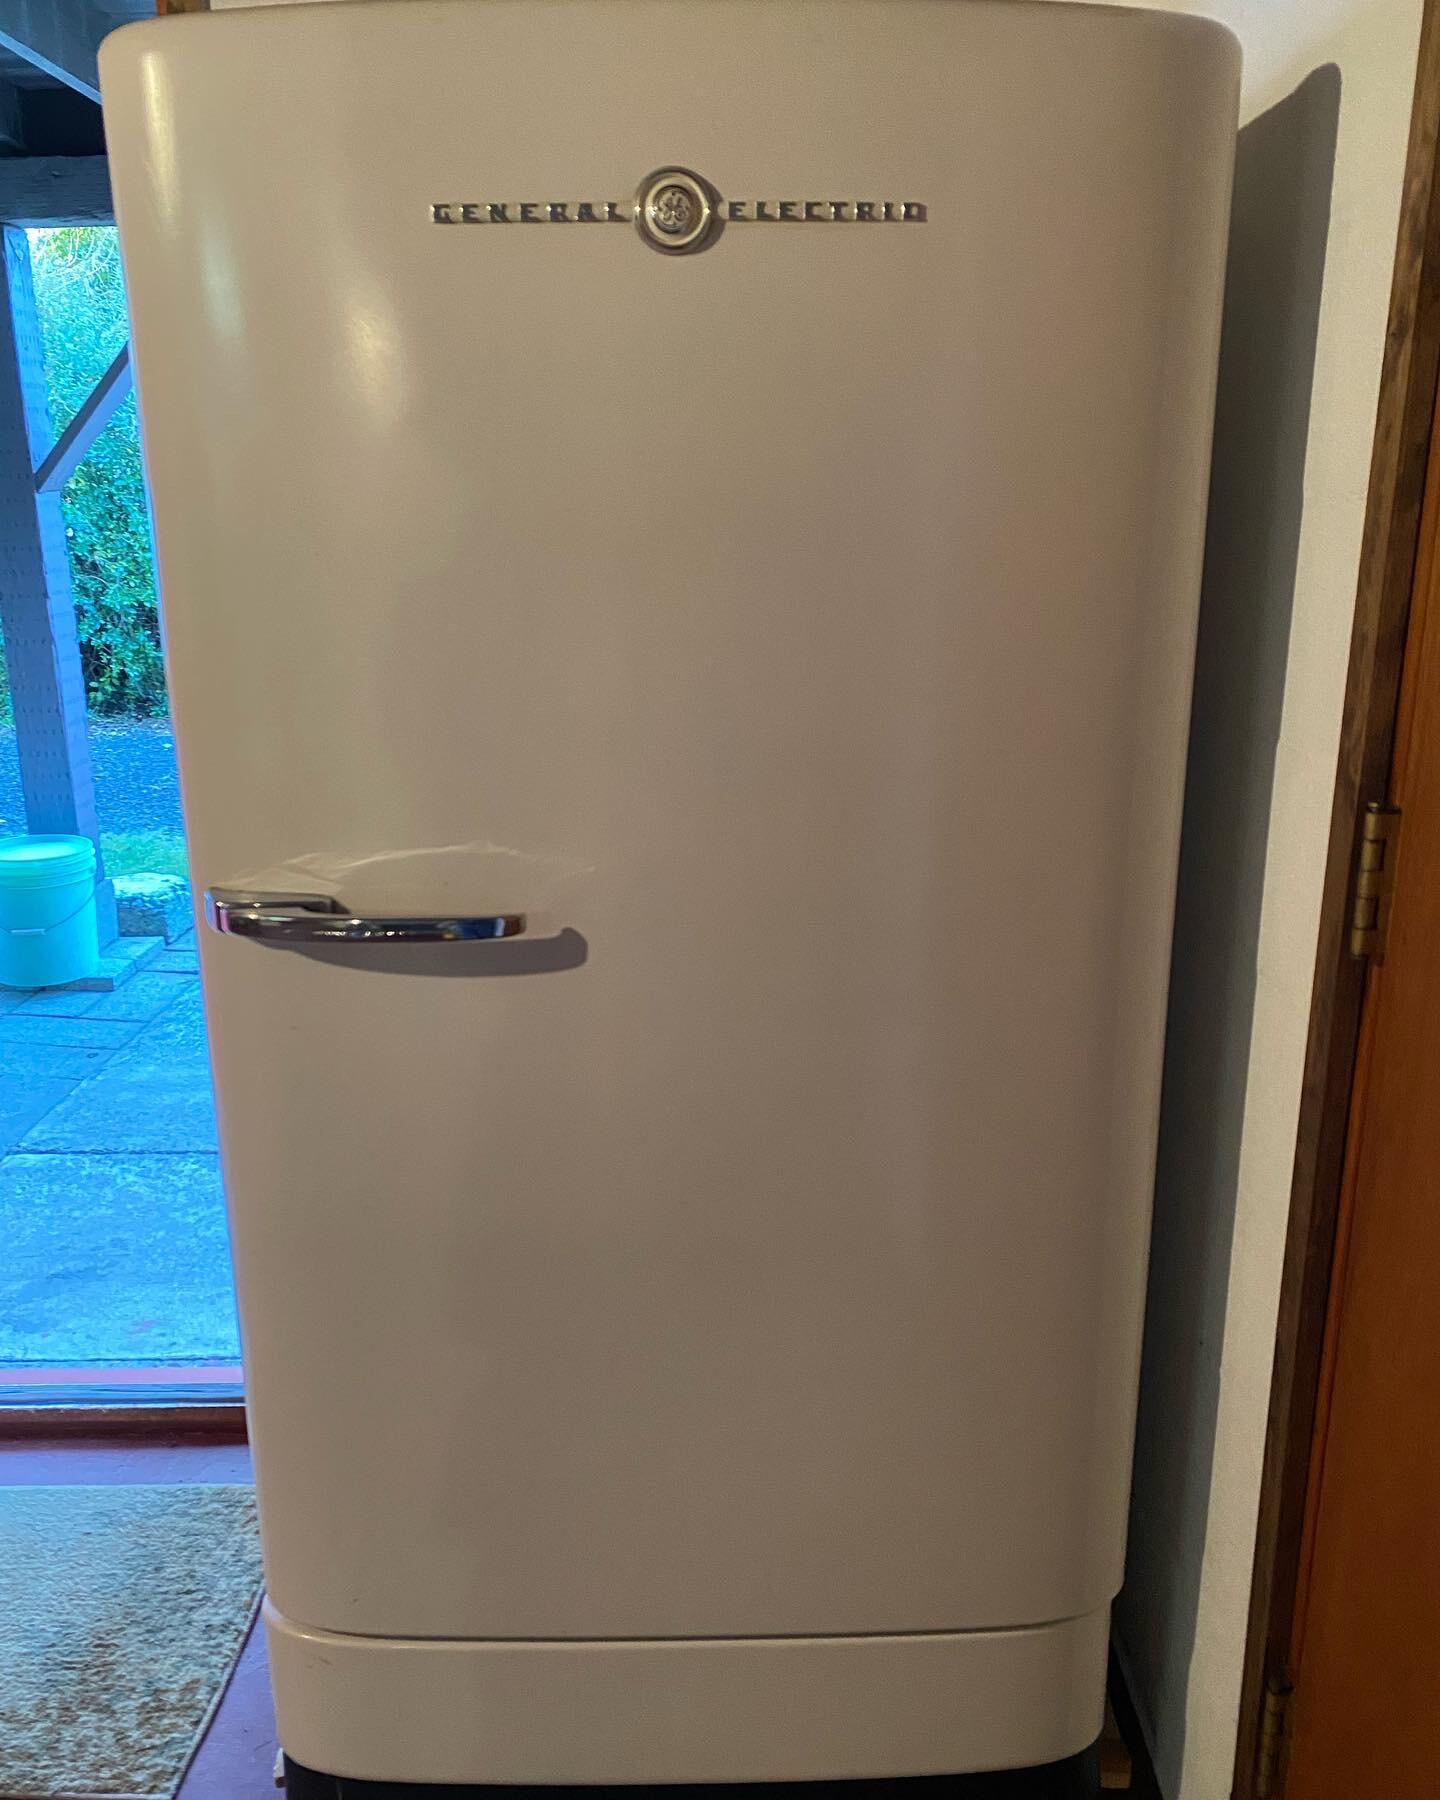 Vintage 1957 GE Refrigerator Great Condition For $1,200 In Olympia